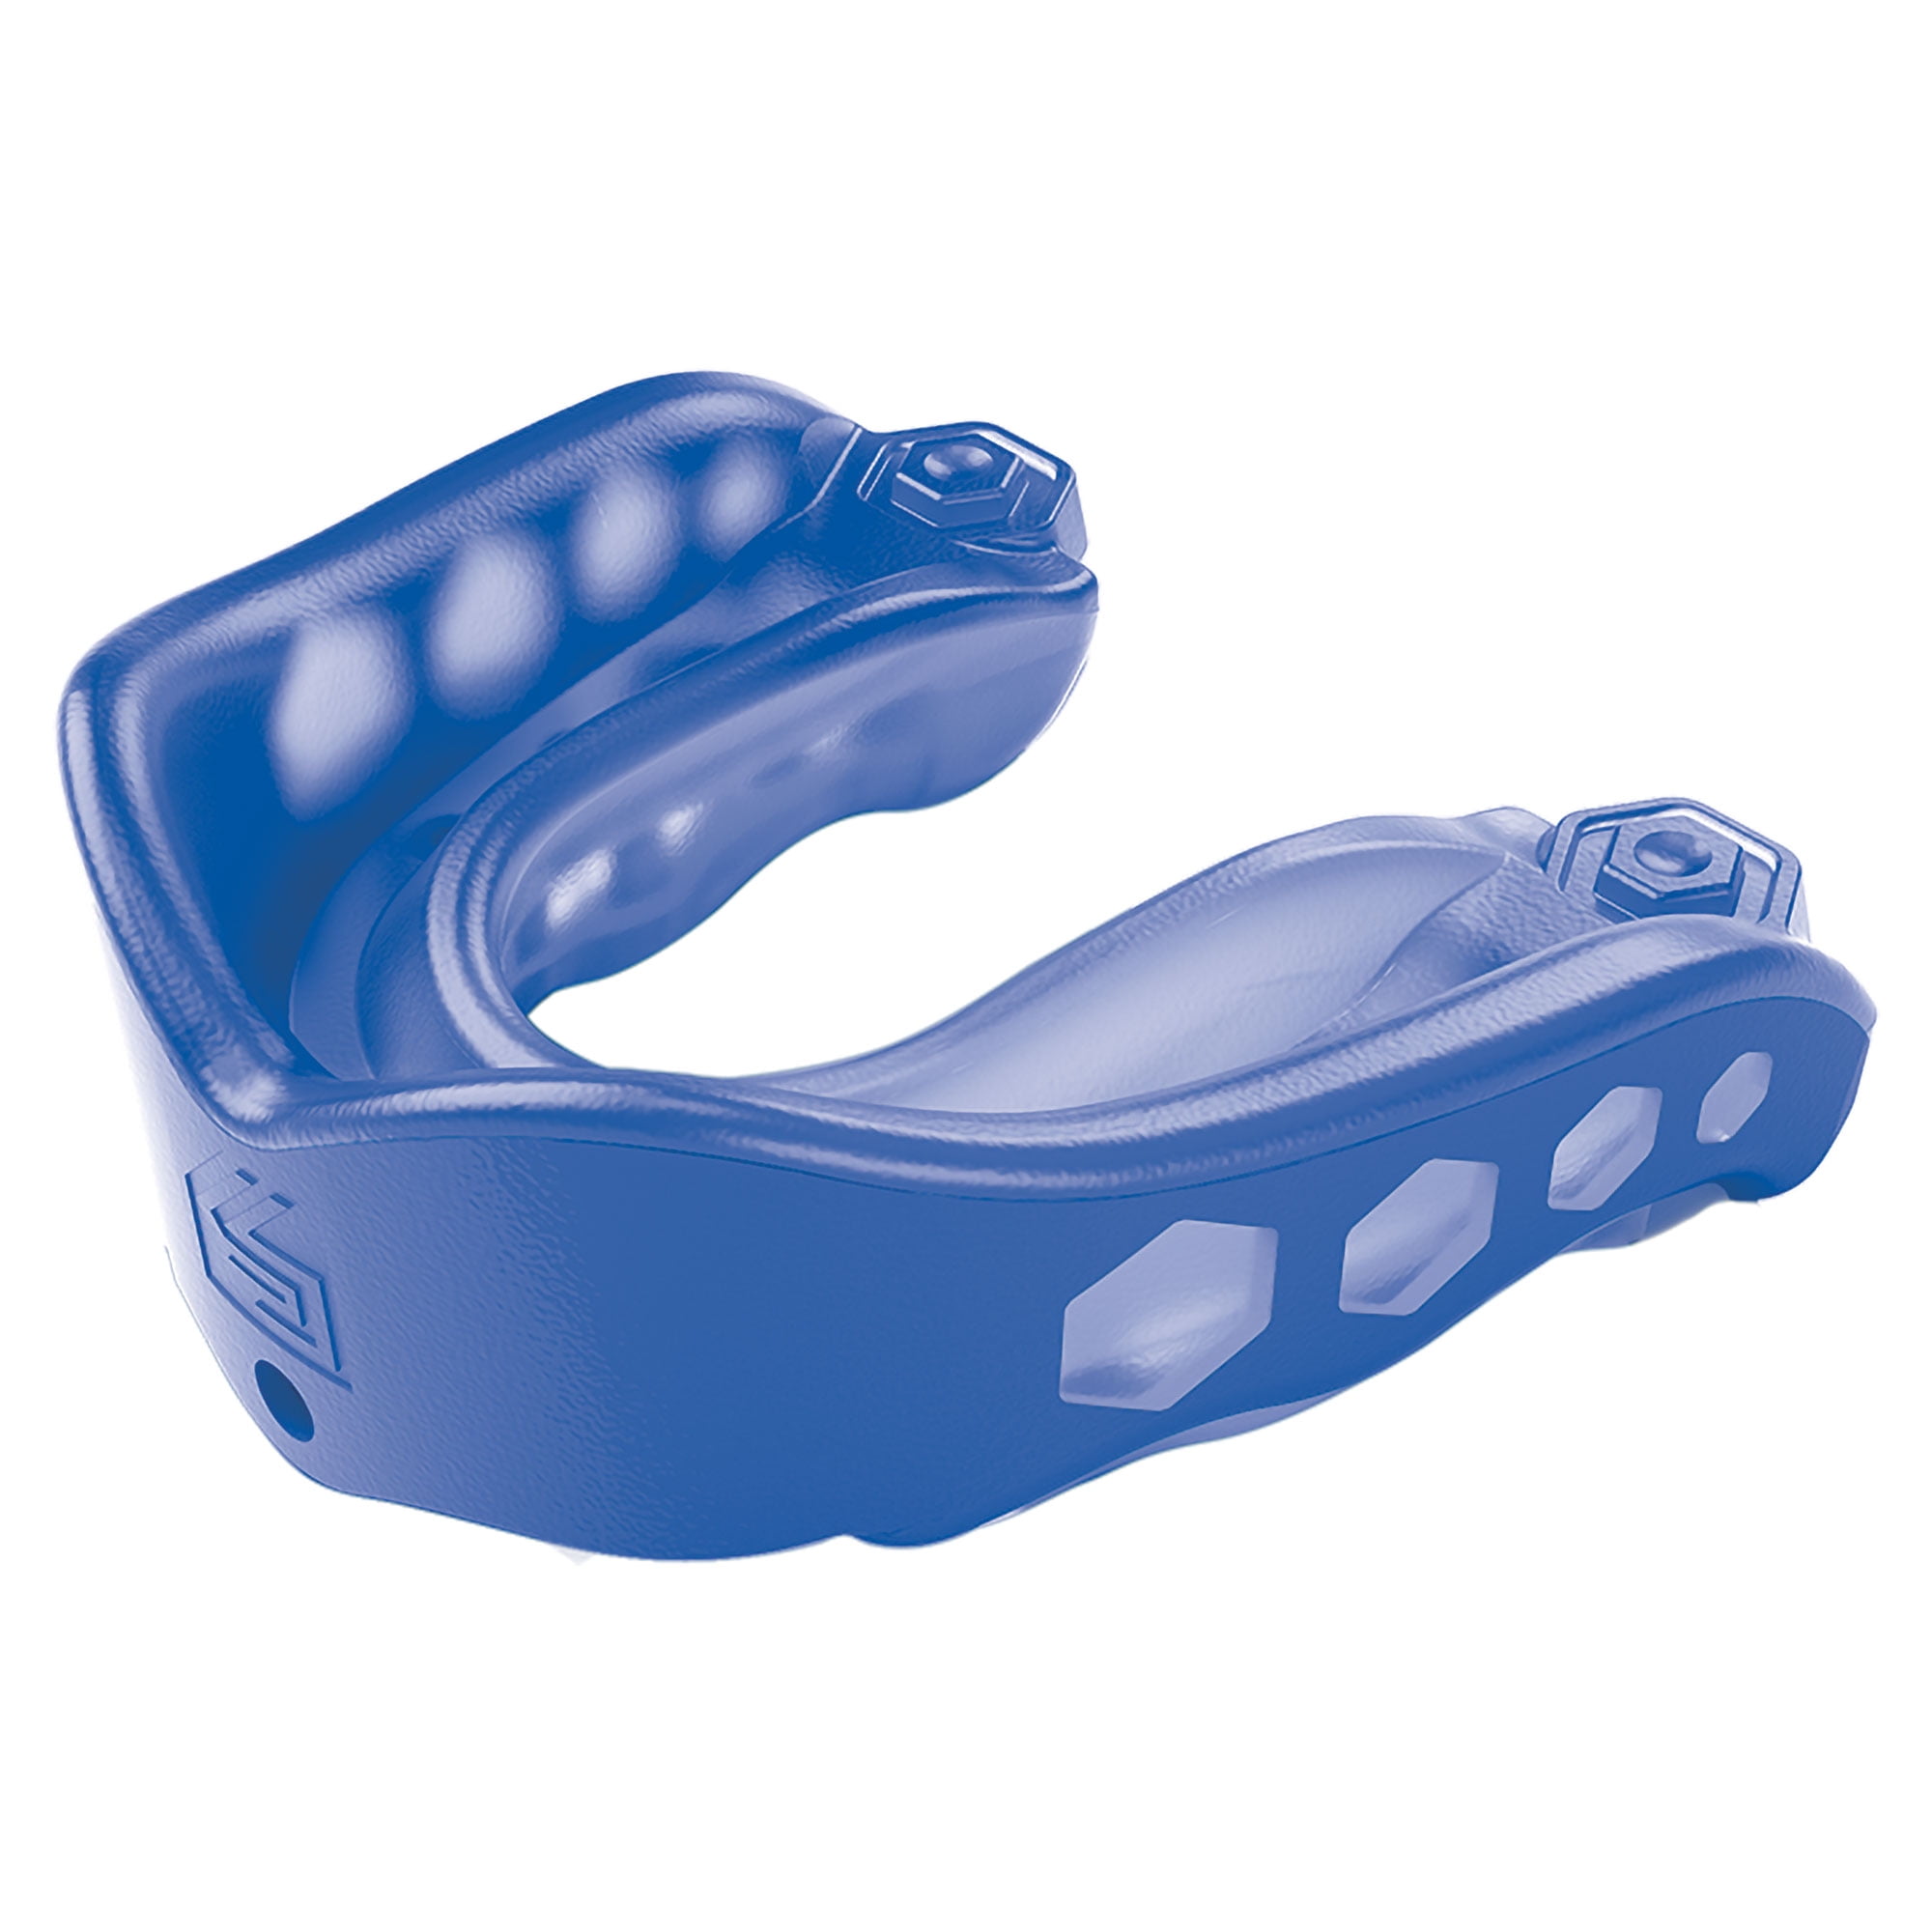 Mouth Guard Piece Teeth Protector Football Basketball Soccer Boxing MMA NEW 